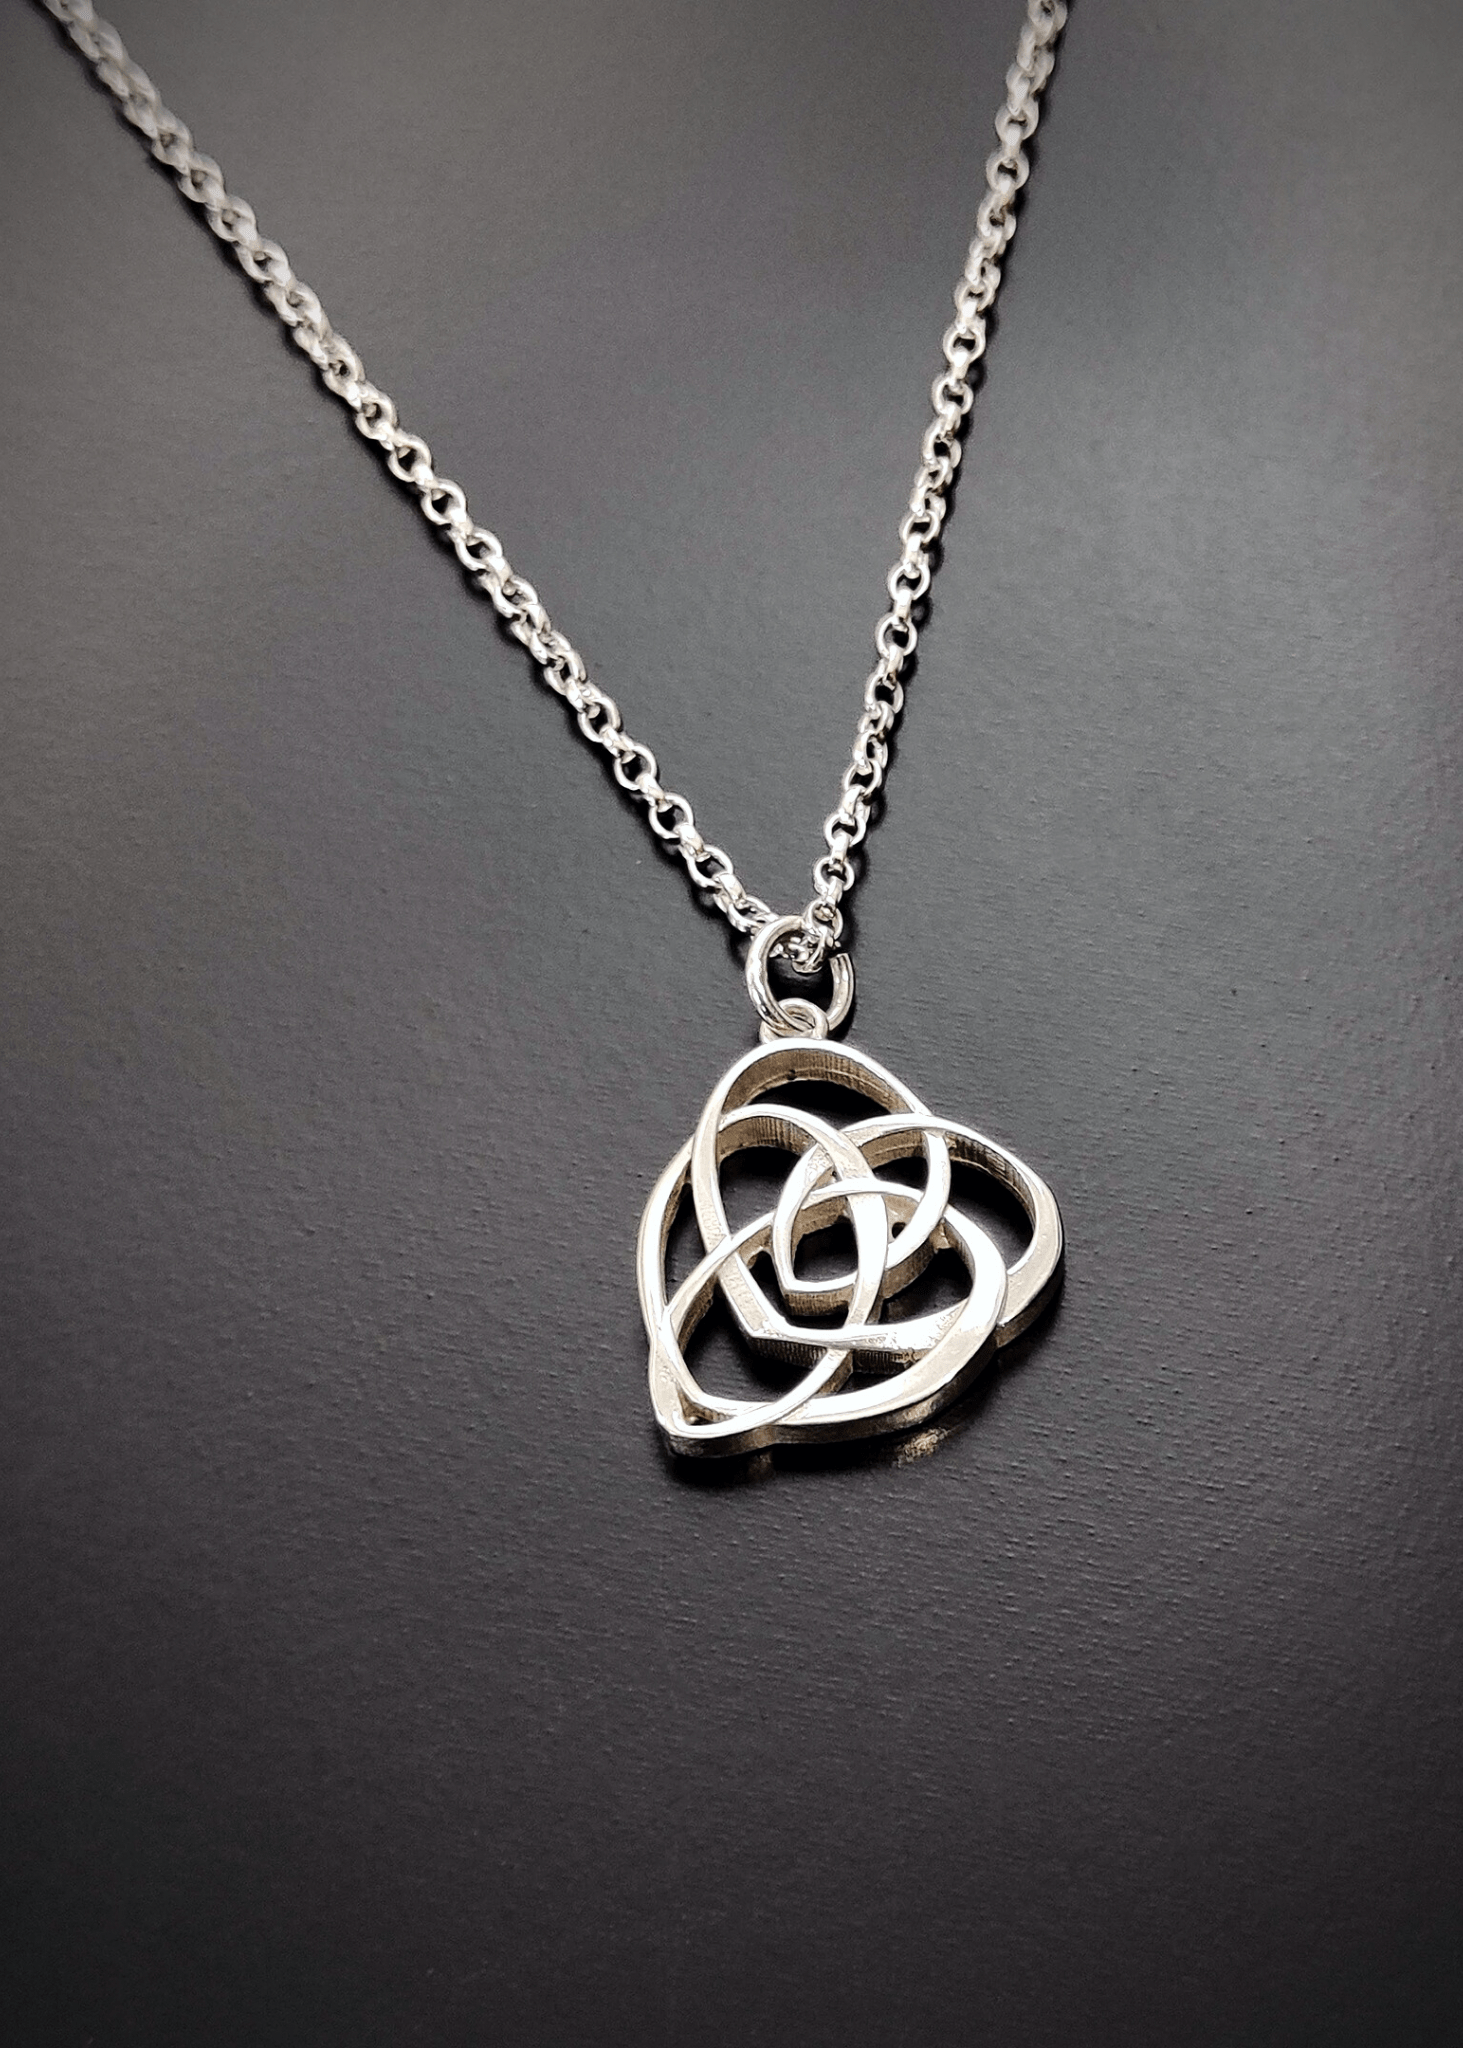 Buy Men's celtic DARA Knot Necklace Men's Silver Stainless Steel Celtic  Dara Knot Ring Medallion Pendant Necklace Mens Silver Chain Necklace Online  in India - Etsy